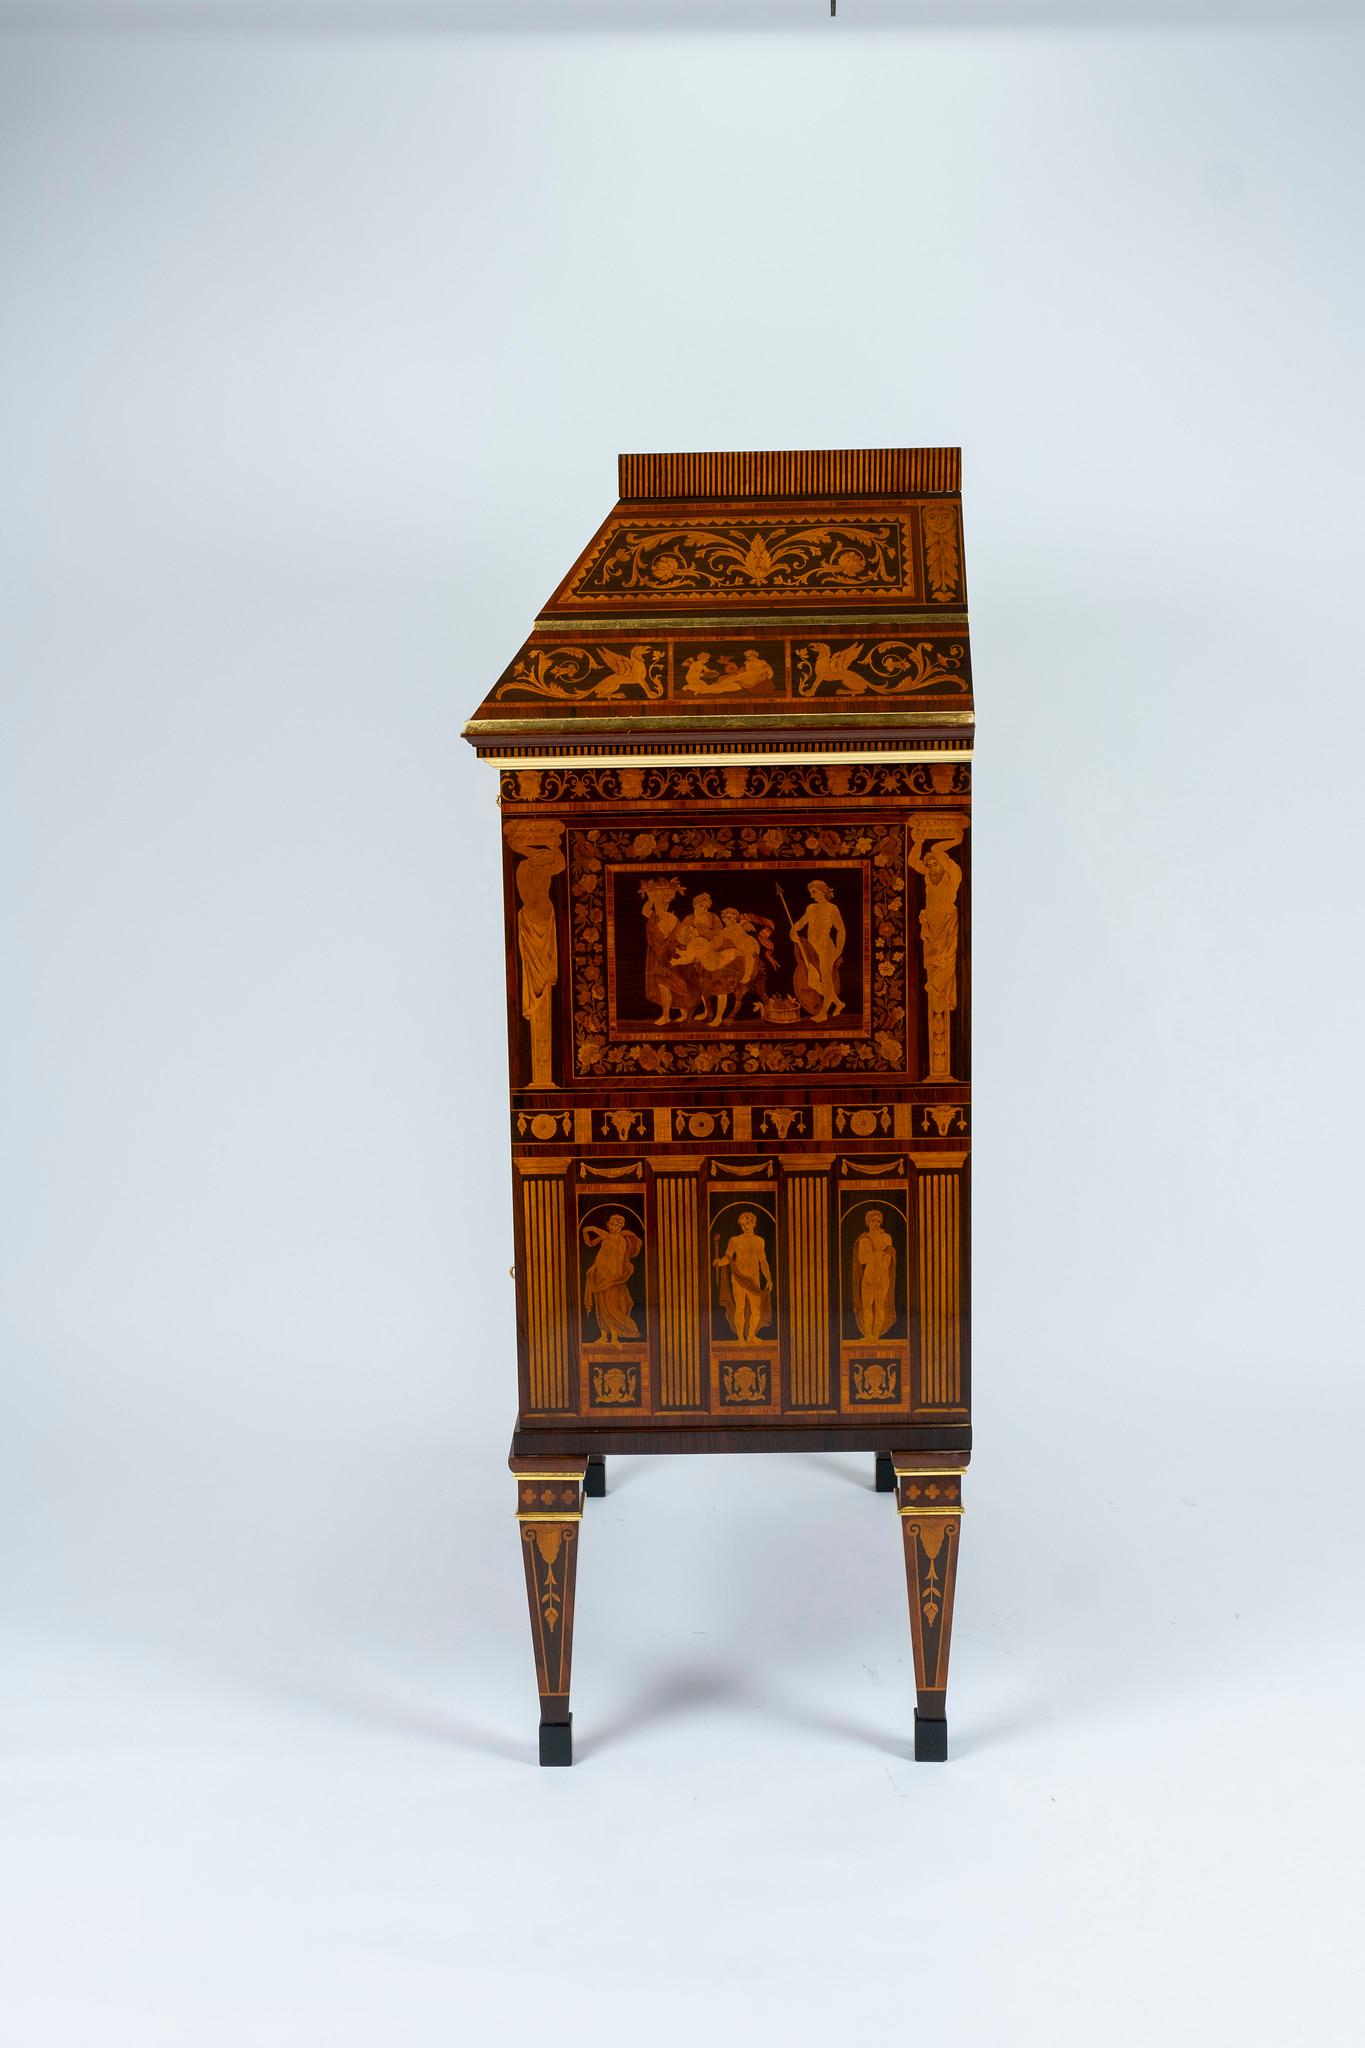 An important Italian neoclassical style secretary made with extraordinary craftsmanship of inlay and hardwoods.

Attribution: Famous artist Francesco Abbiati, originally from a small town near Lake Como created a feast for the senses, even before